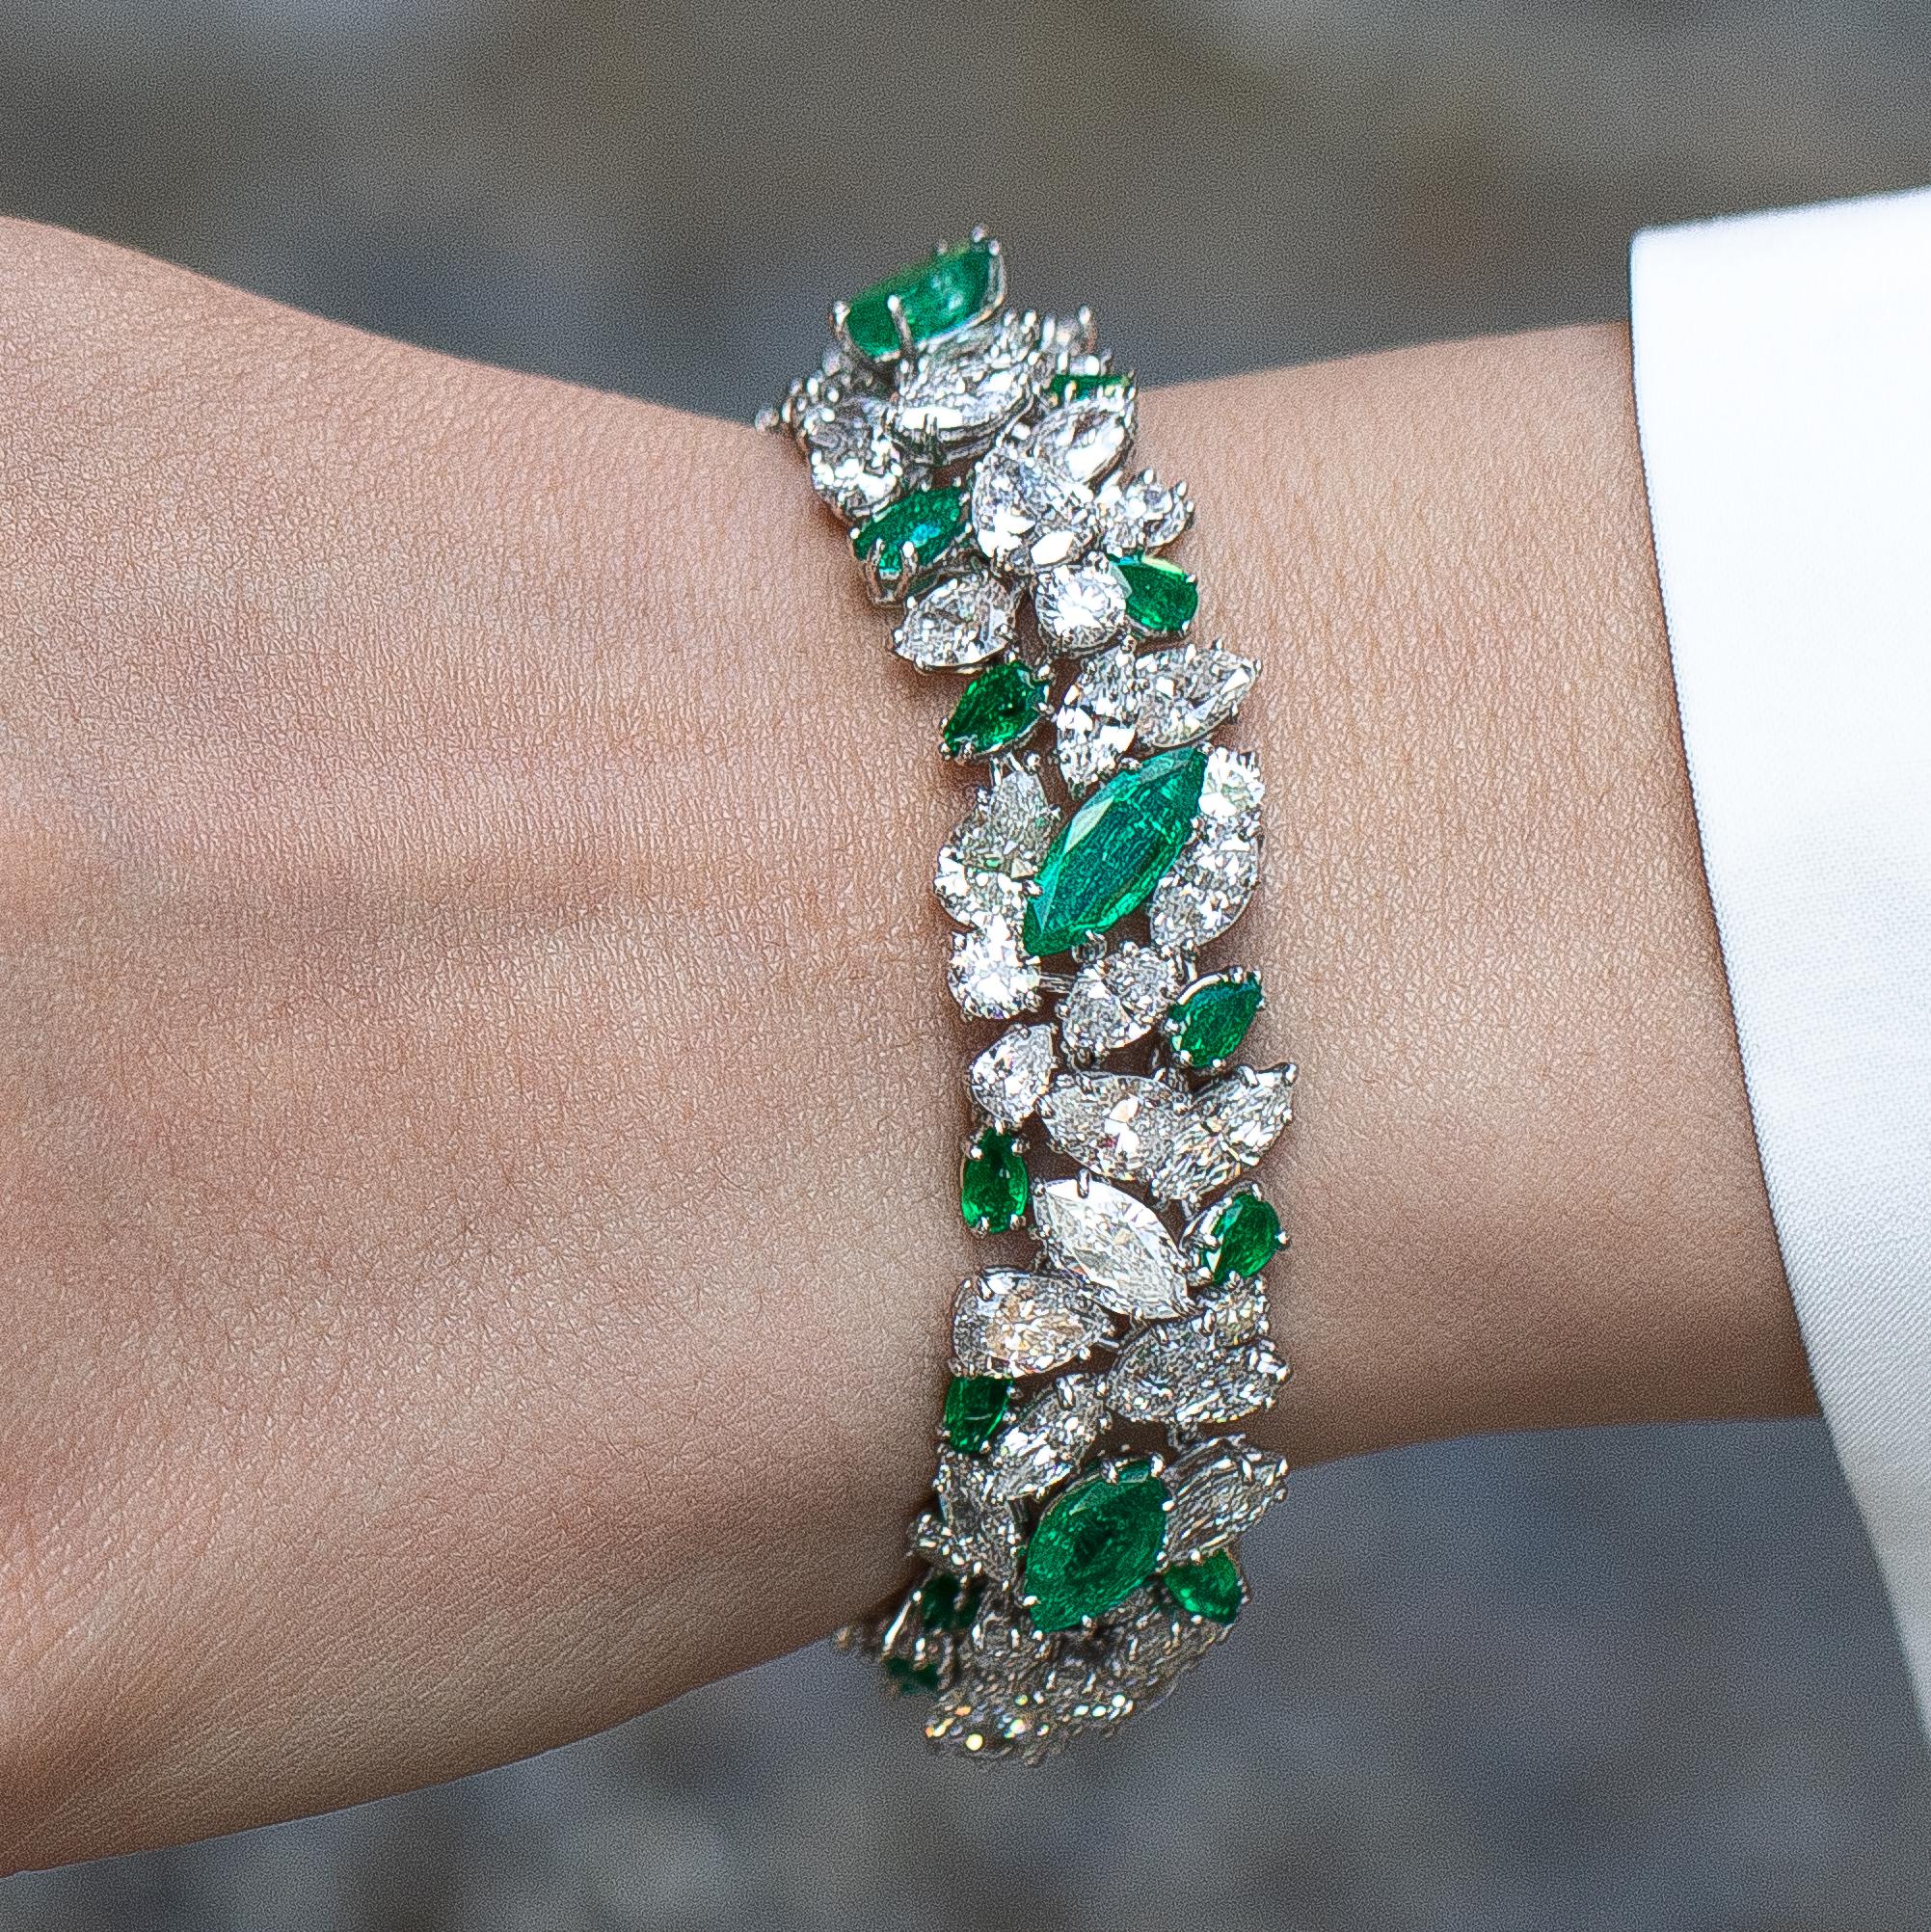 Signed Van Cleef & Arpels bracelet featuring 18 Carats Fine Emeralds. Exquisitely crafted Marquise and pear shaped emeralds and diamonds, adorn your wrist with beauty and elegance. 
Fine Emeralds = 18 carats
Diamonds = 30 carats
( Color: D-E,